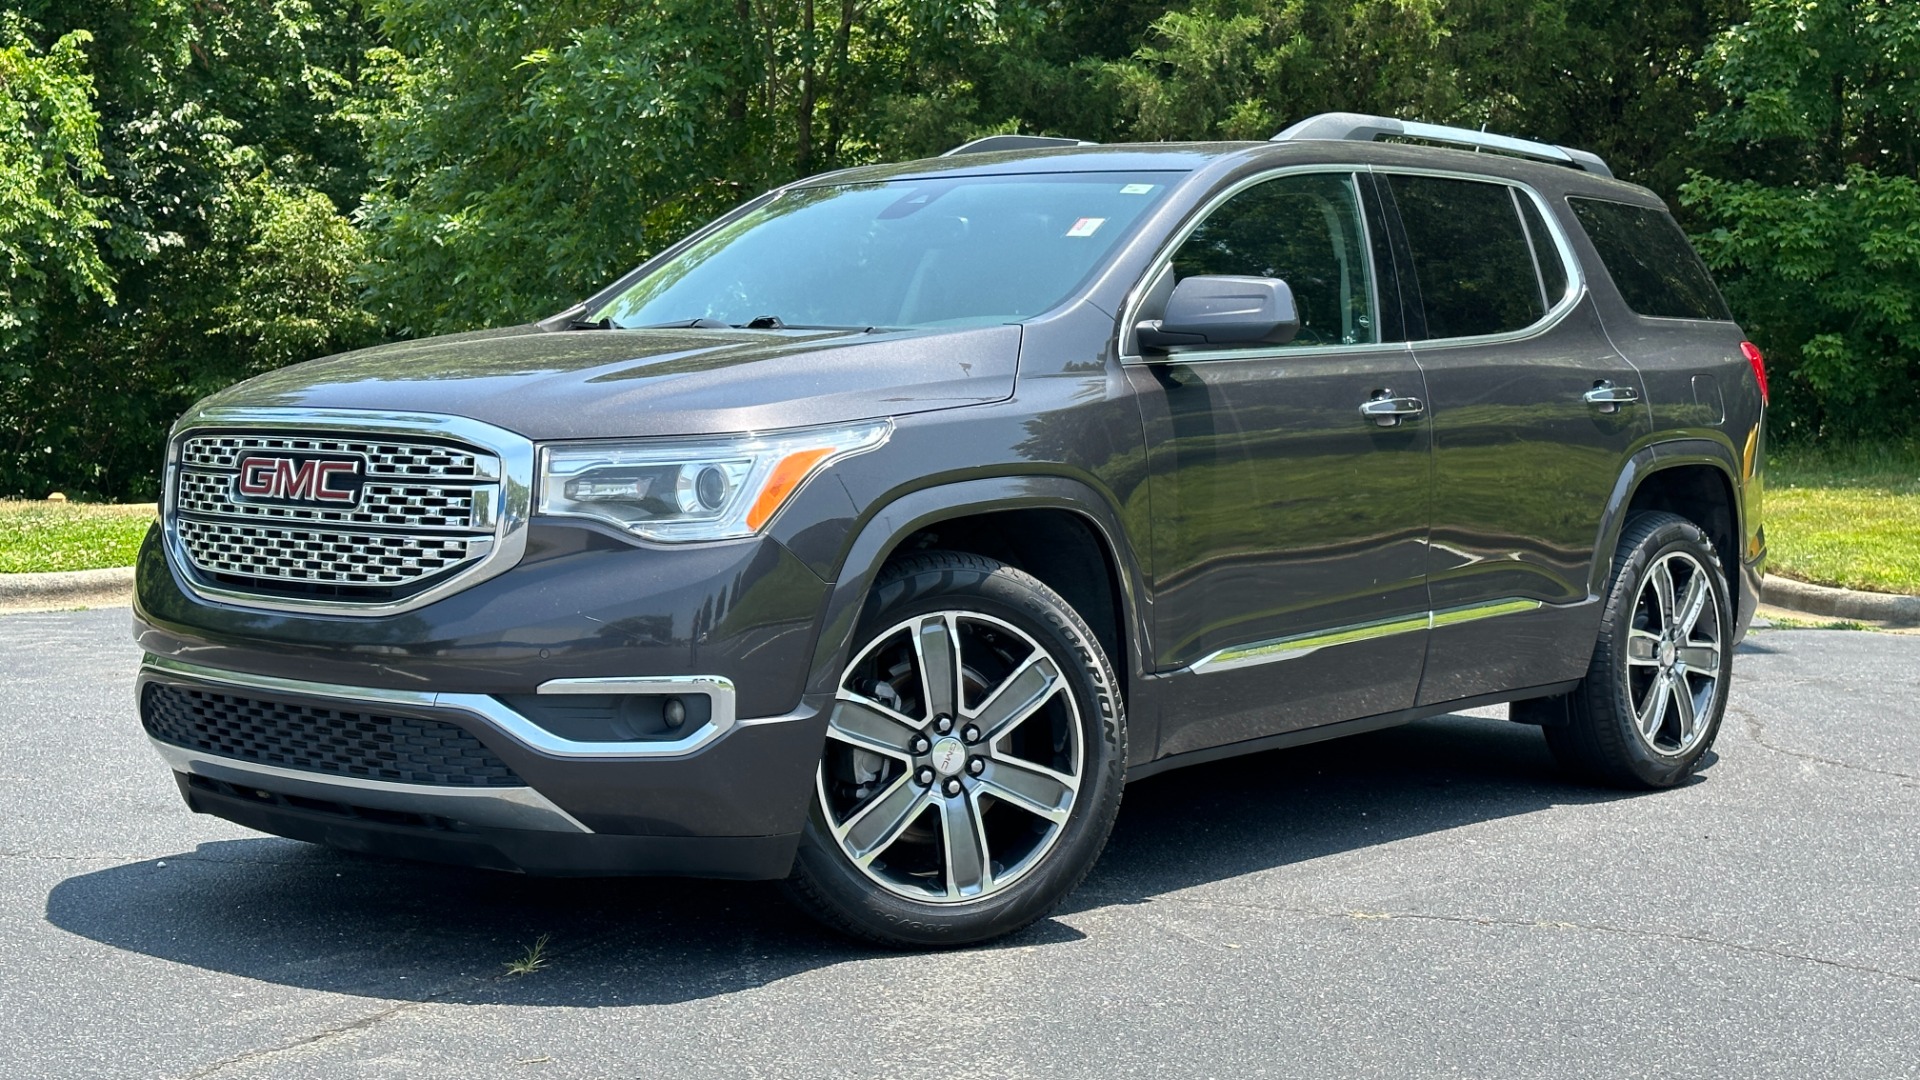 Used 2017 GMC Acadia DENALI / LOADED / PANORAMIC ROOF / METALLIC PAINT for sale Sold at Formula Imports in Charlotte NC 28227 1